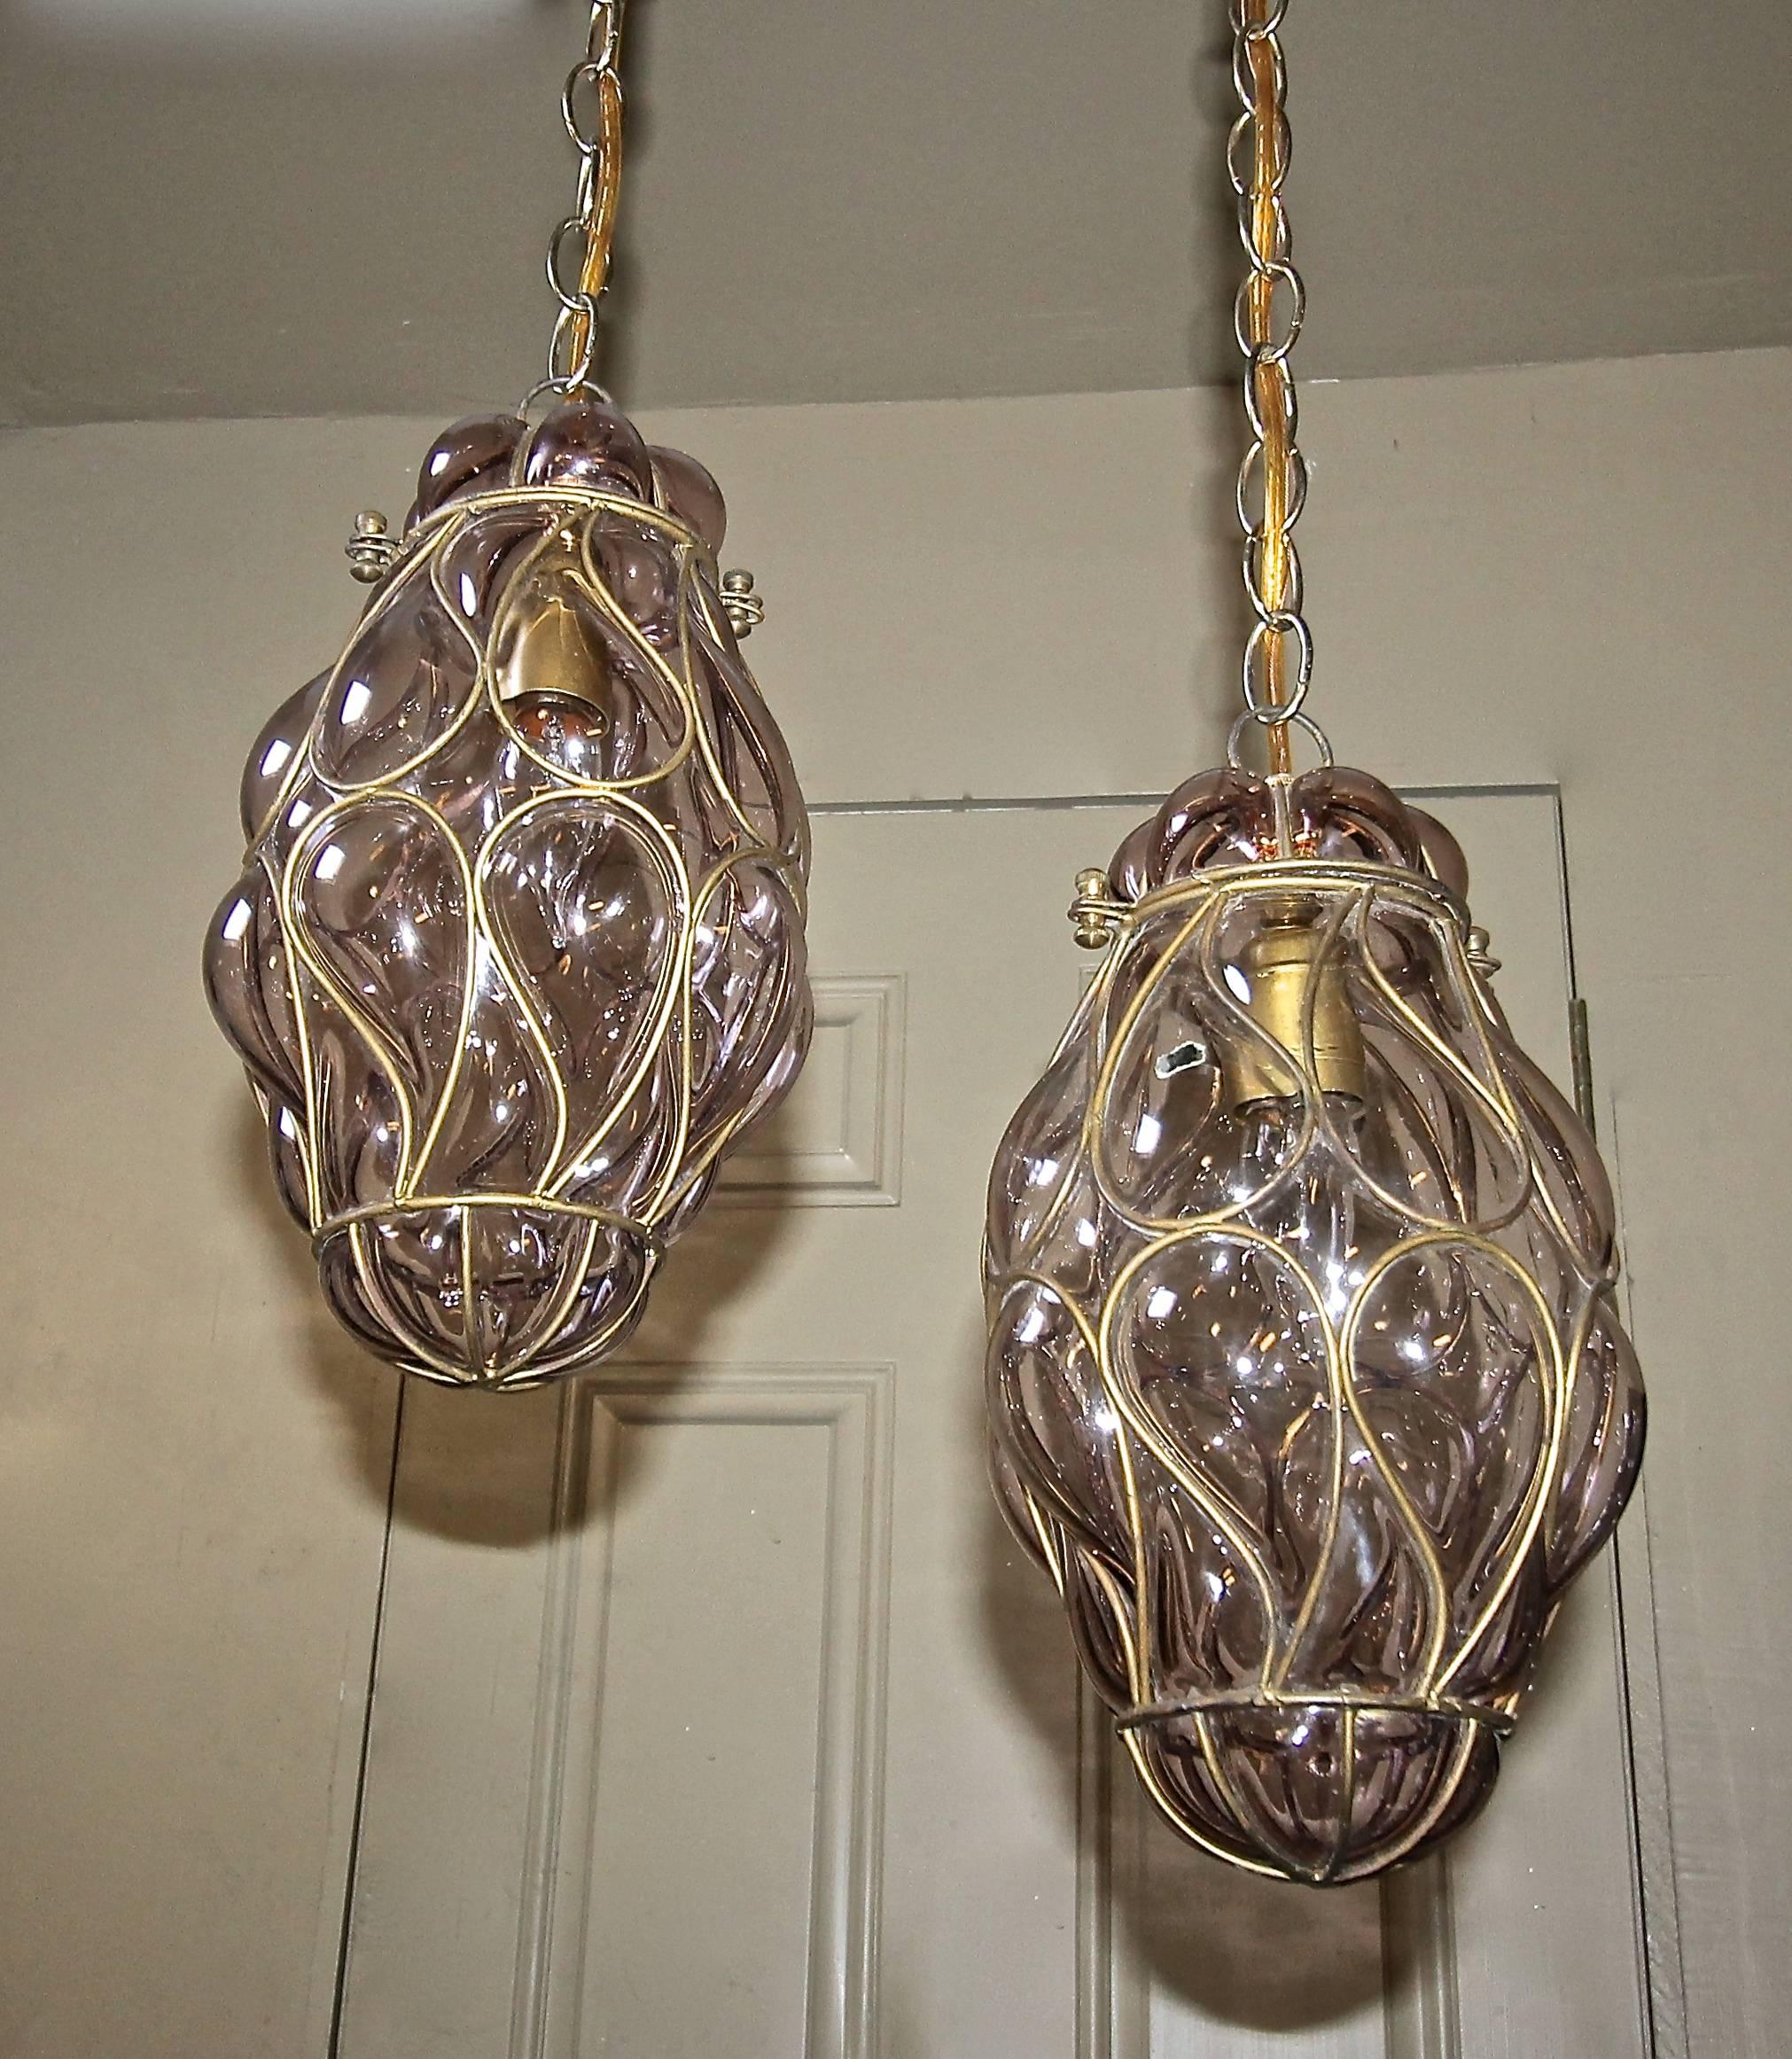 Pair of Italian Venetian wire cage amethyst color (pale purple) glass and brass finish metal pendant or lantern lights. Each fixture uses one 60-watt "A" base bulb Newly wired. Size of each fixture 13" tall x 7" wide, overall